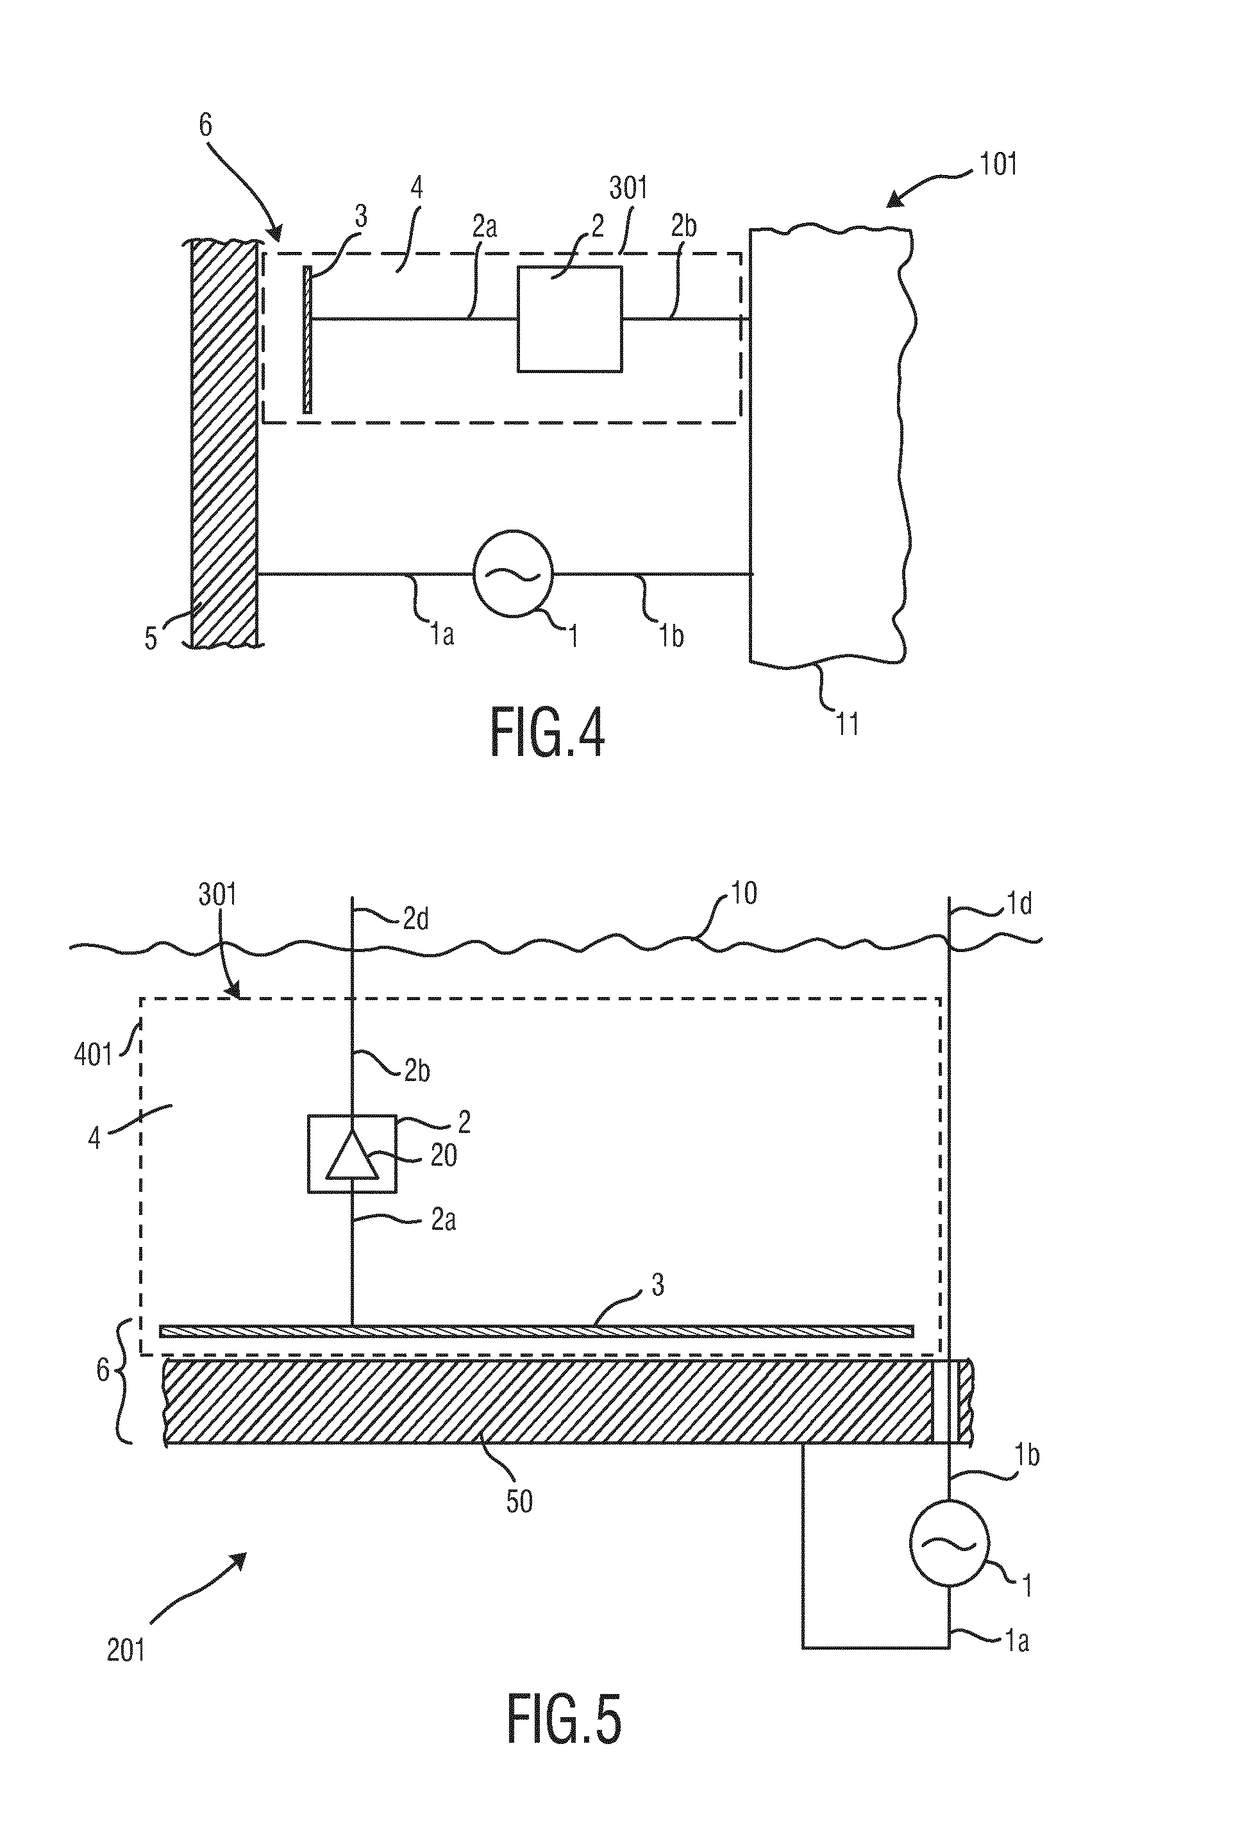 Load arrangement and electrical power arrangement for powering a load